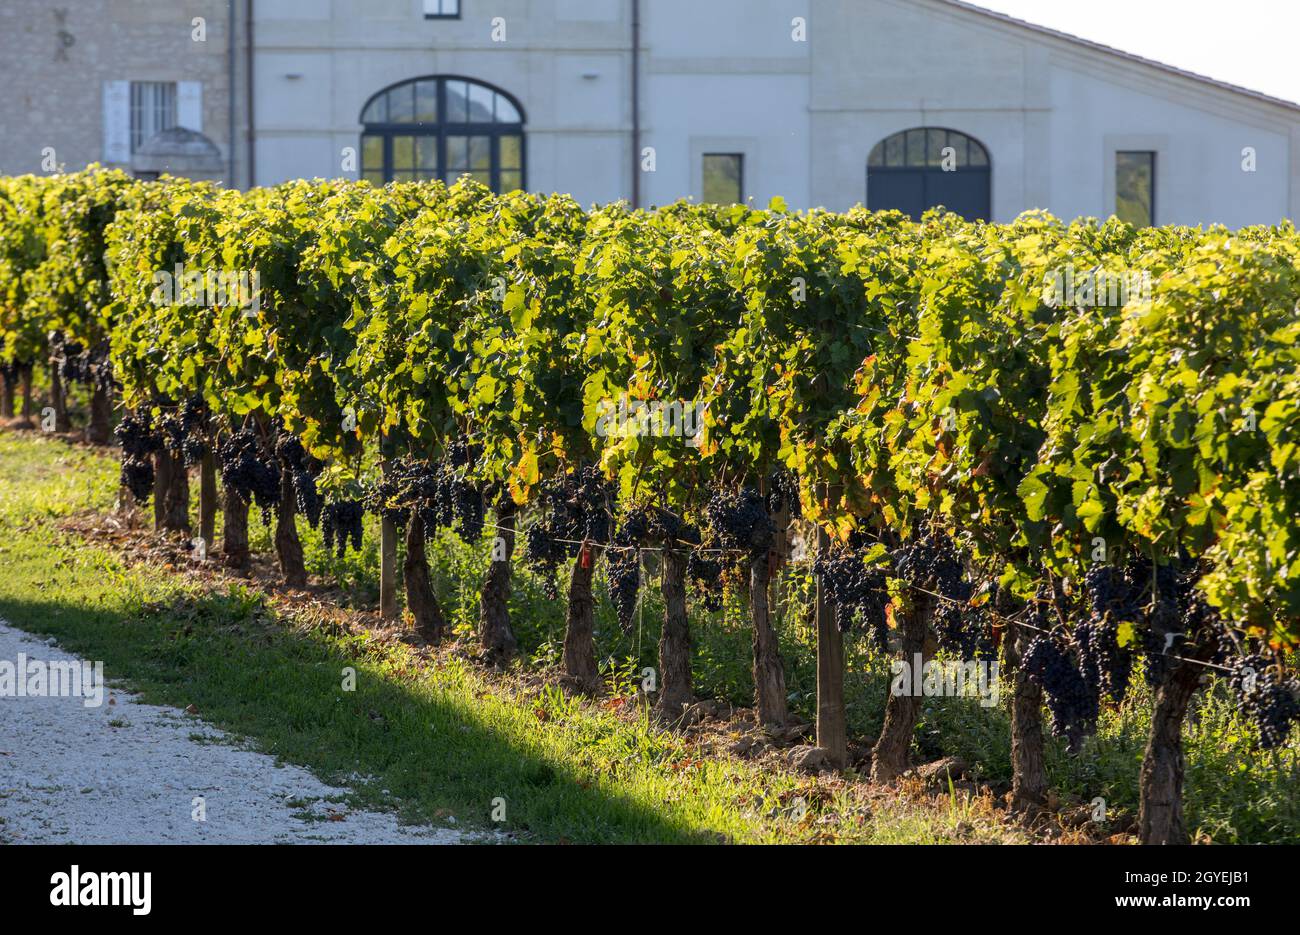 Ripe red  grapes on rows of vines in a vienyard before the wine harvest in Saint Emilion region. France Stock Photo